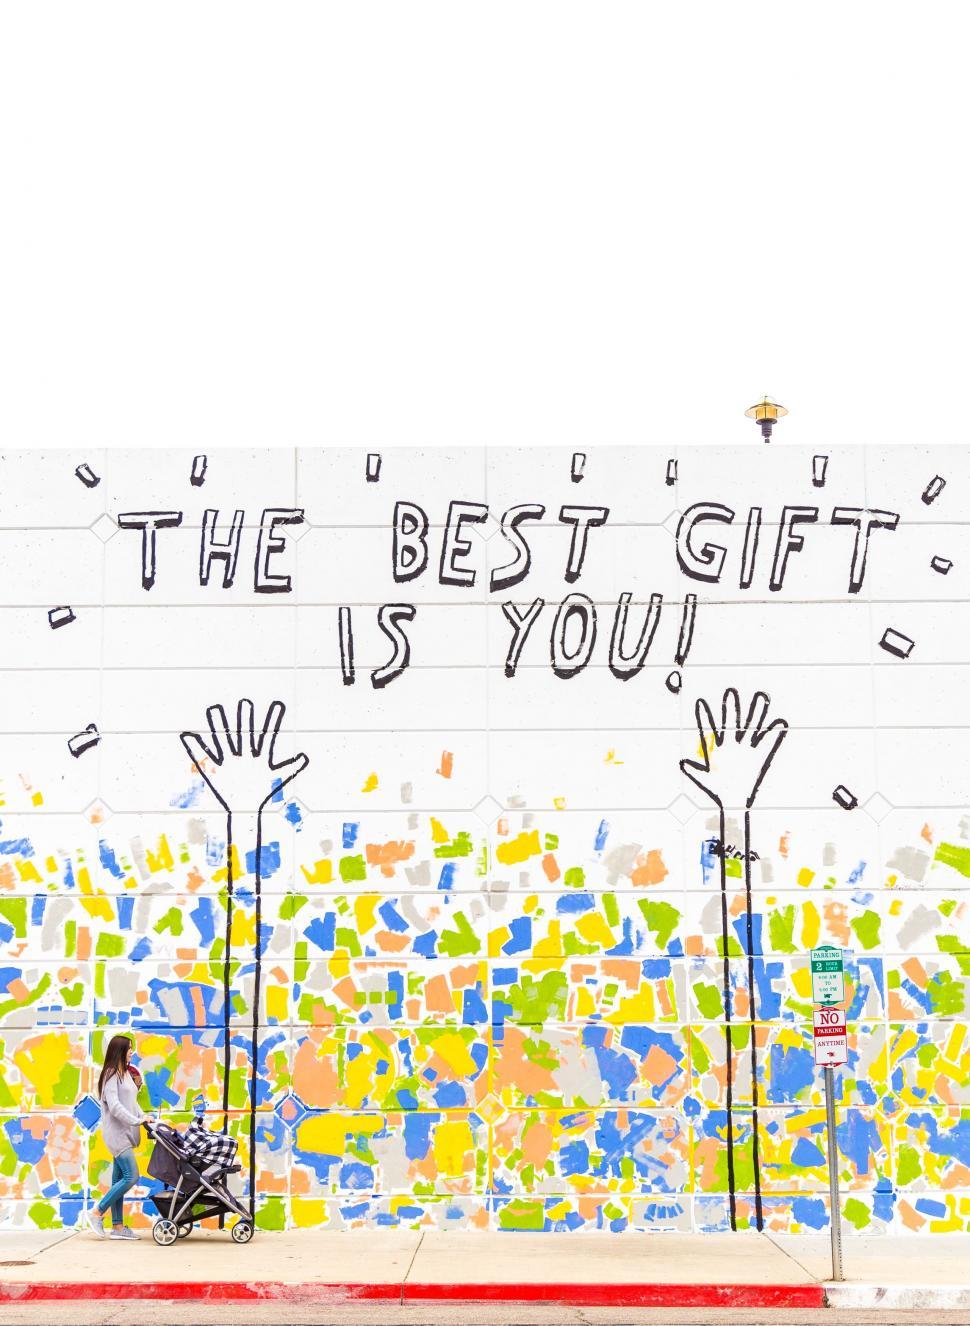 Free Image of A Mural on the Side of a Building That Says the Best Gift Is You 